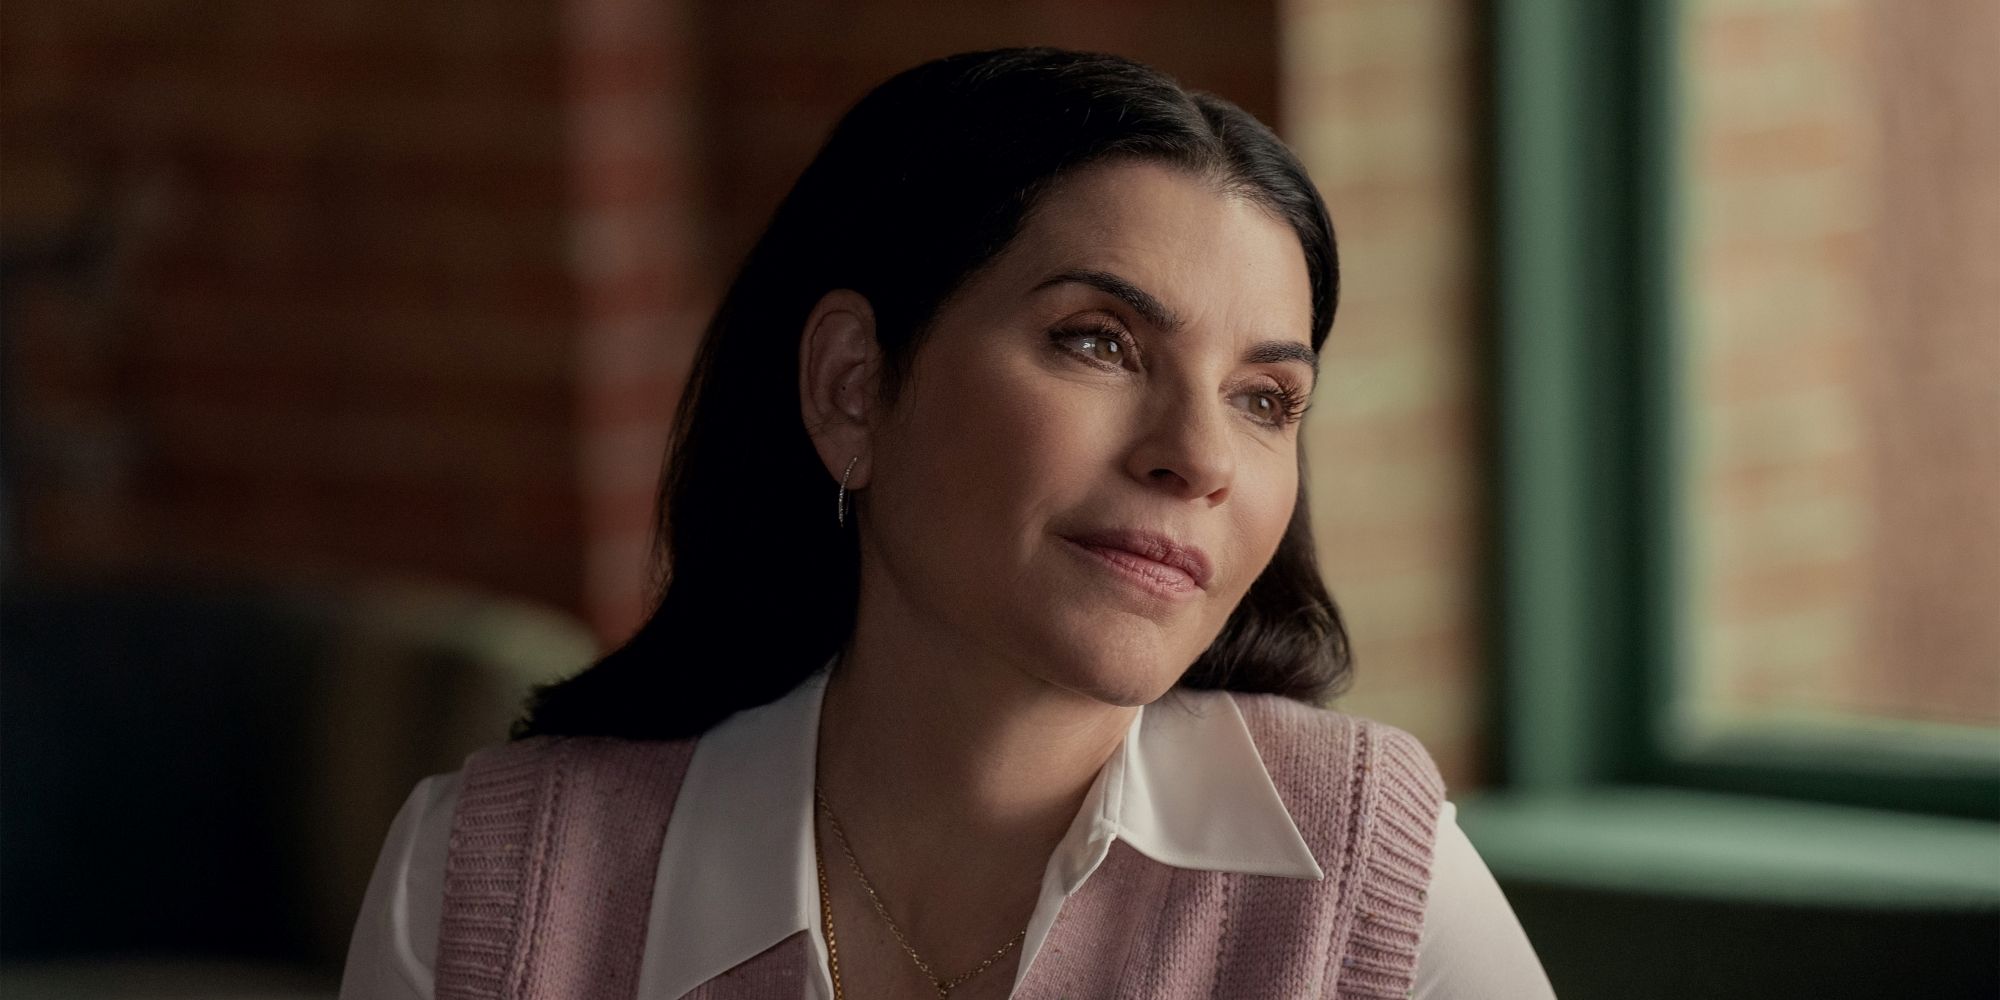 Julianna Margulies als Laura Peterson in The Morning Show Staffel 3, Folge 8.jpg